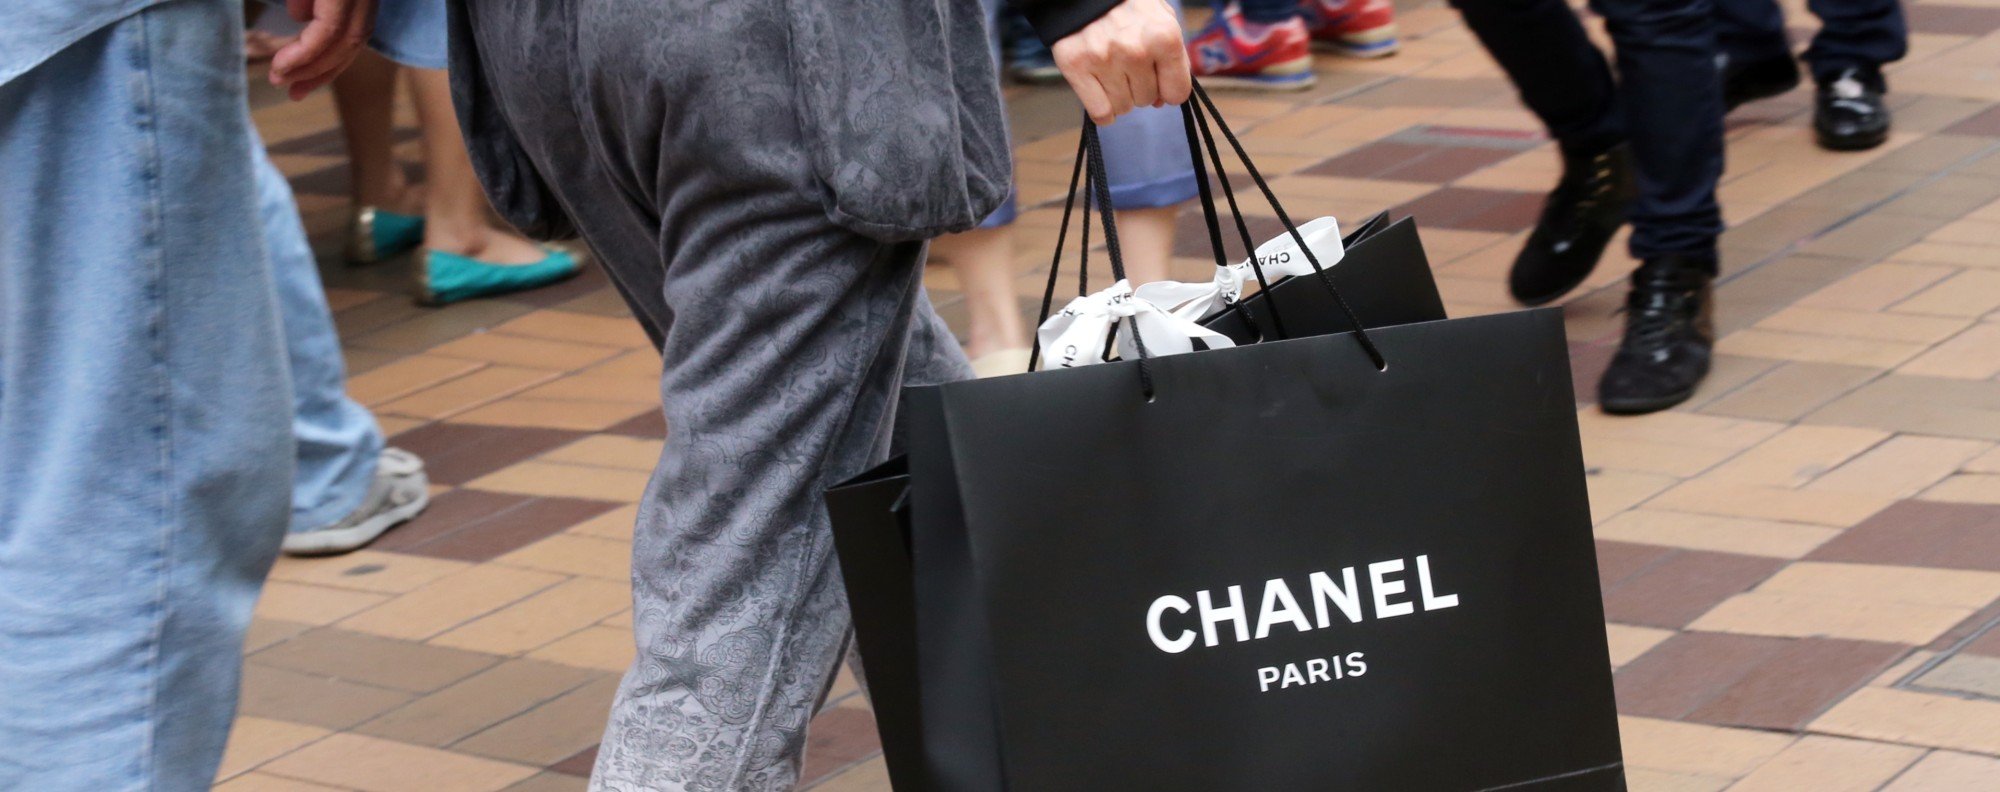 French luxury brand Chanel 're-aligns' prices to give mainland